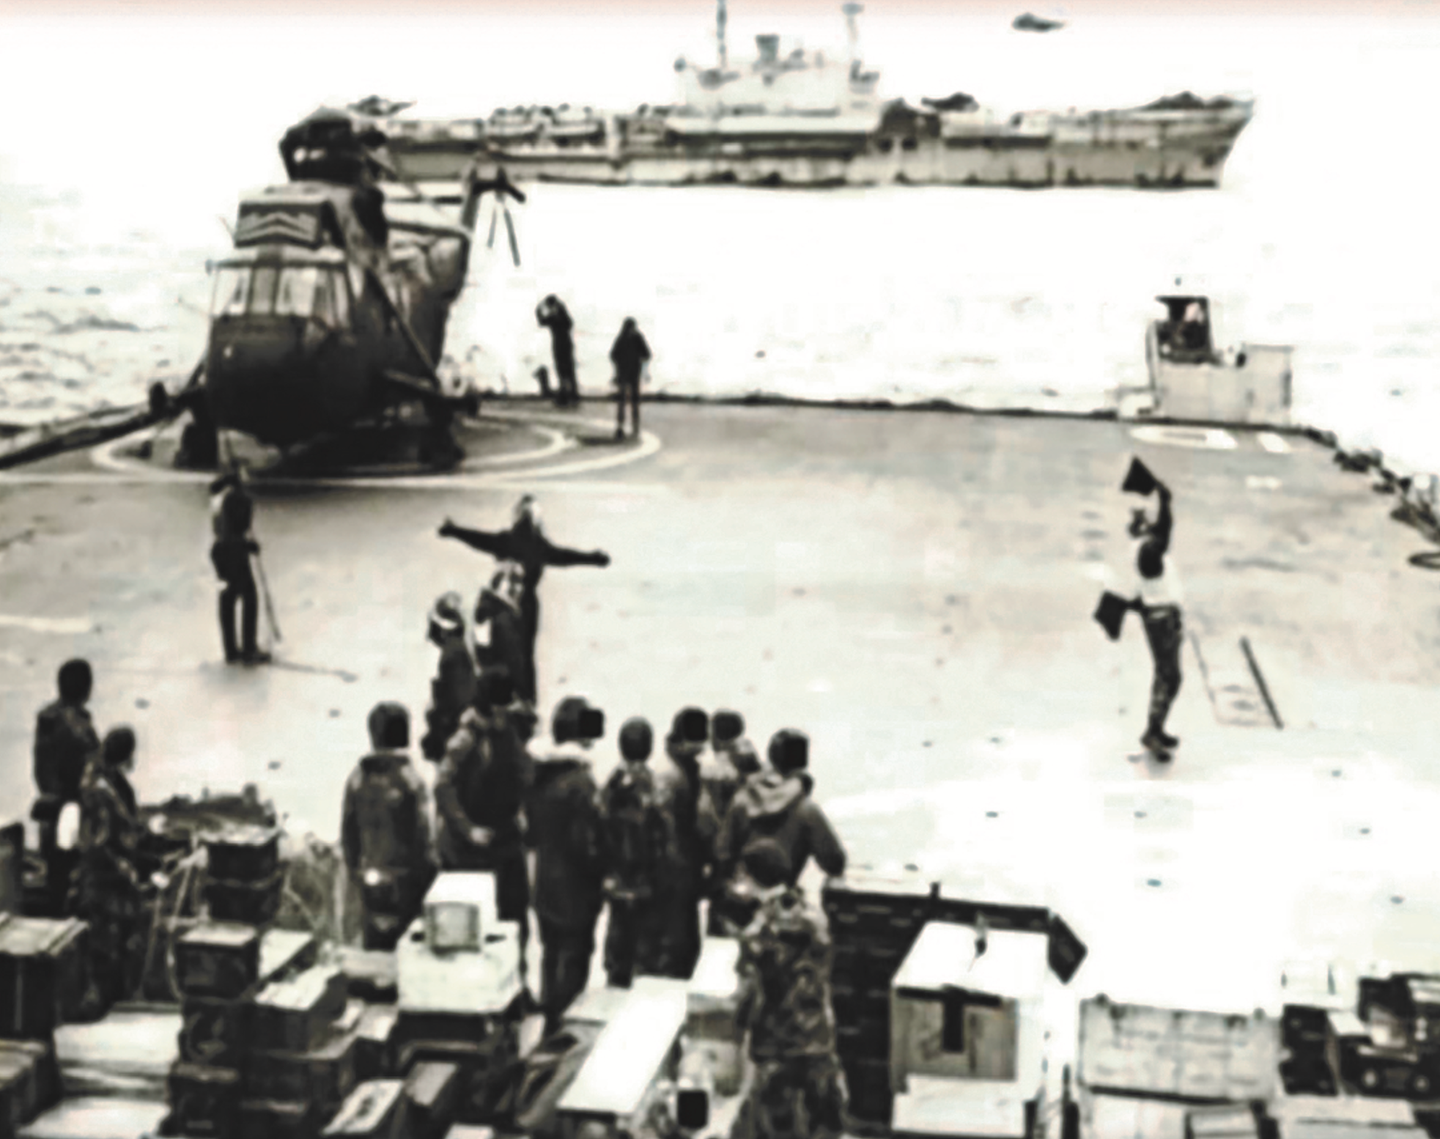 The flight deck of HMS <em>Intrepid</em> during the cross-decking operation from <em>Hermes</em> (shown in the background) on May 19. Some of the squadron’s stores are piled up in the foreground with some of the soldiers who had already made the trip over. This picture was taken during daylight, an hour or so before tragedy struck. <em>via publisher</em>